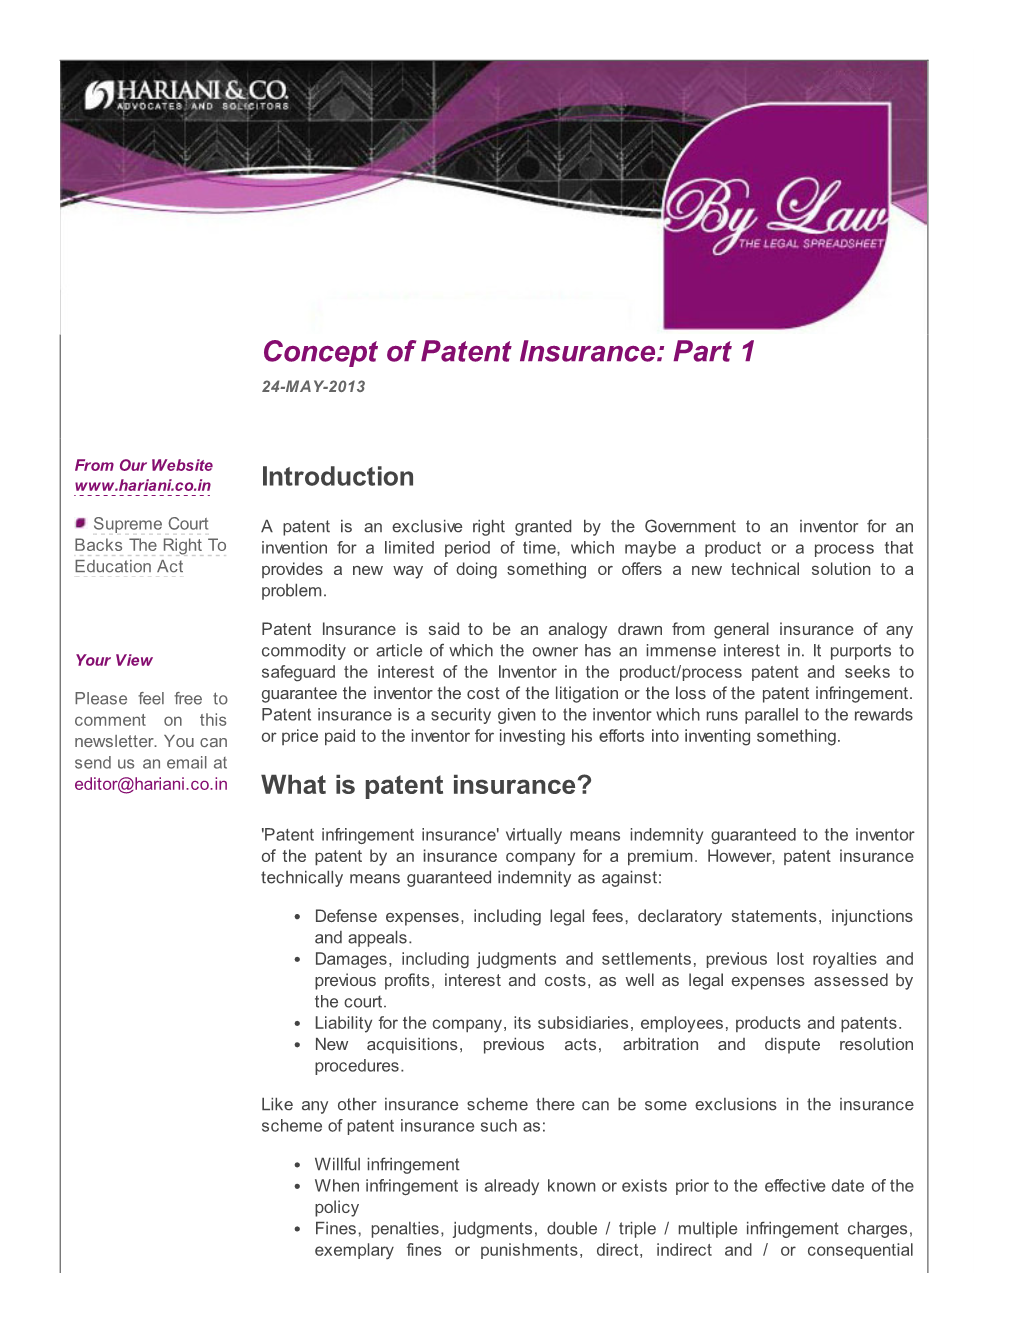 Concept of Patent Insurance: Part 1 24-MAY-2013